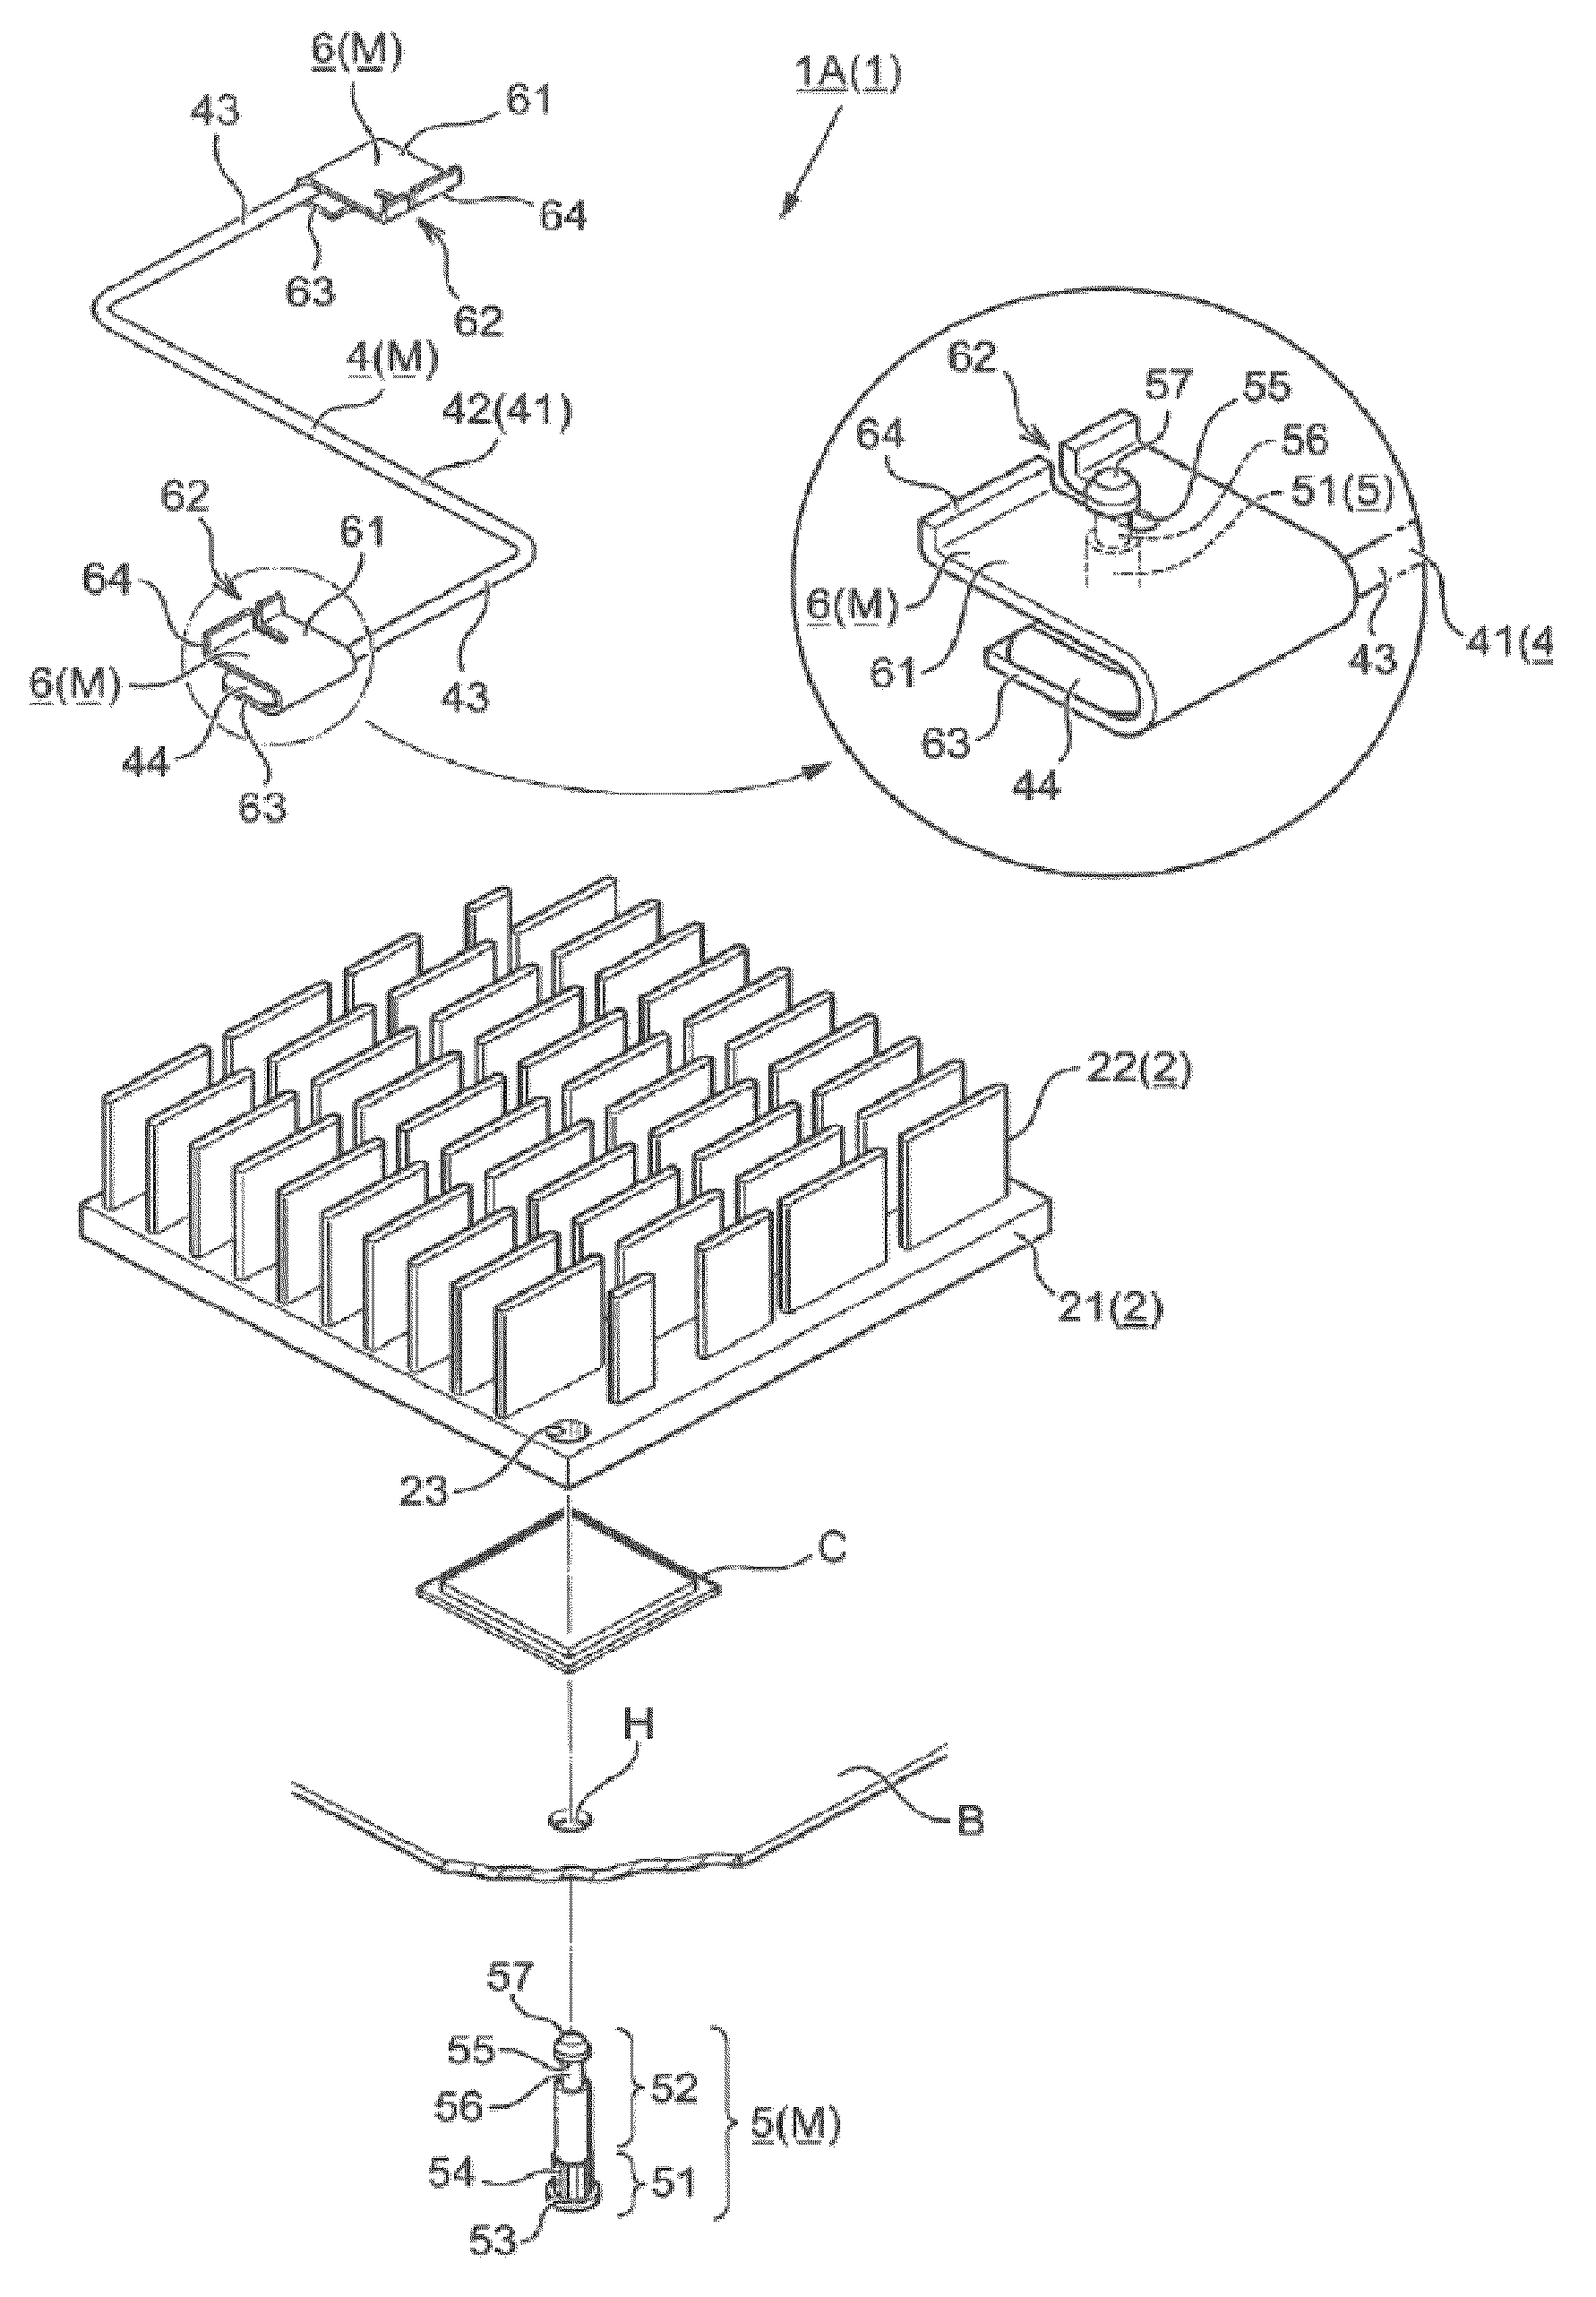 Structure for mounting heat sink, and heat sink mounted using the structure